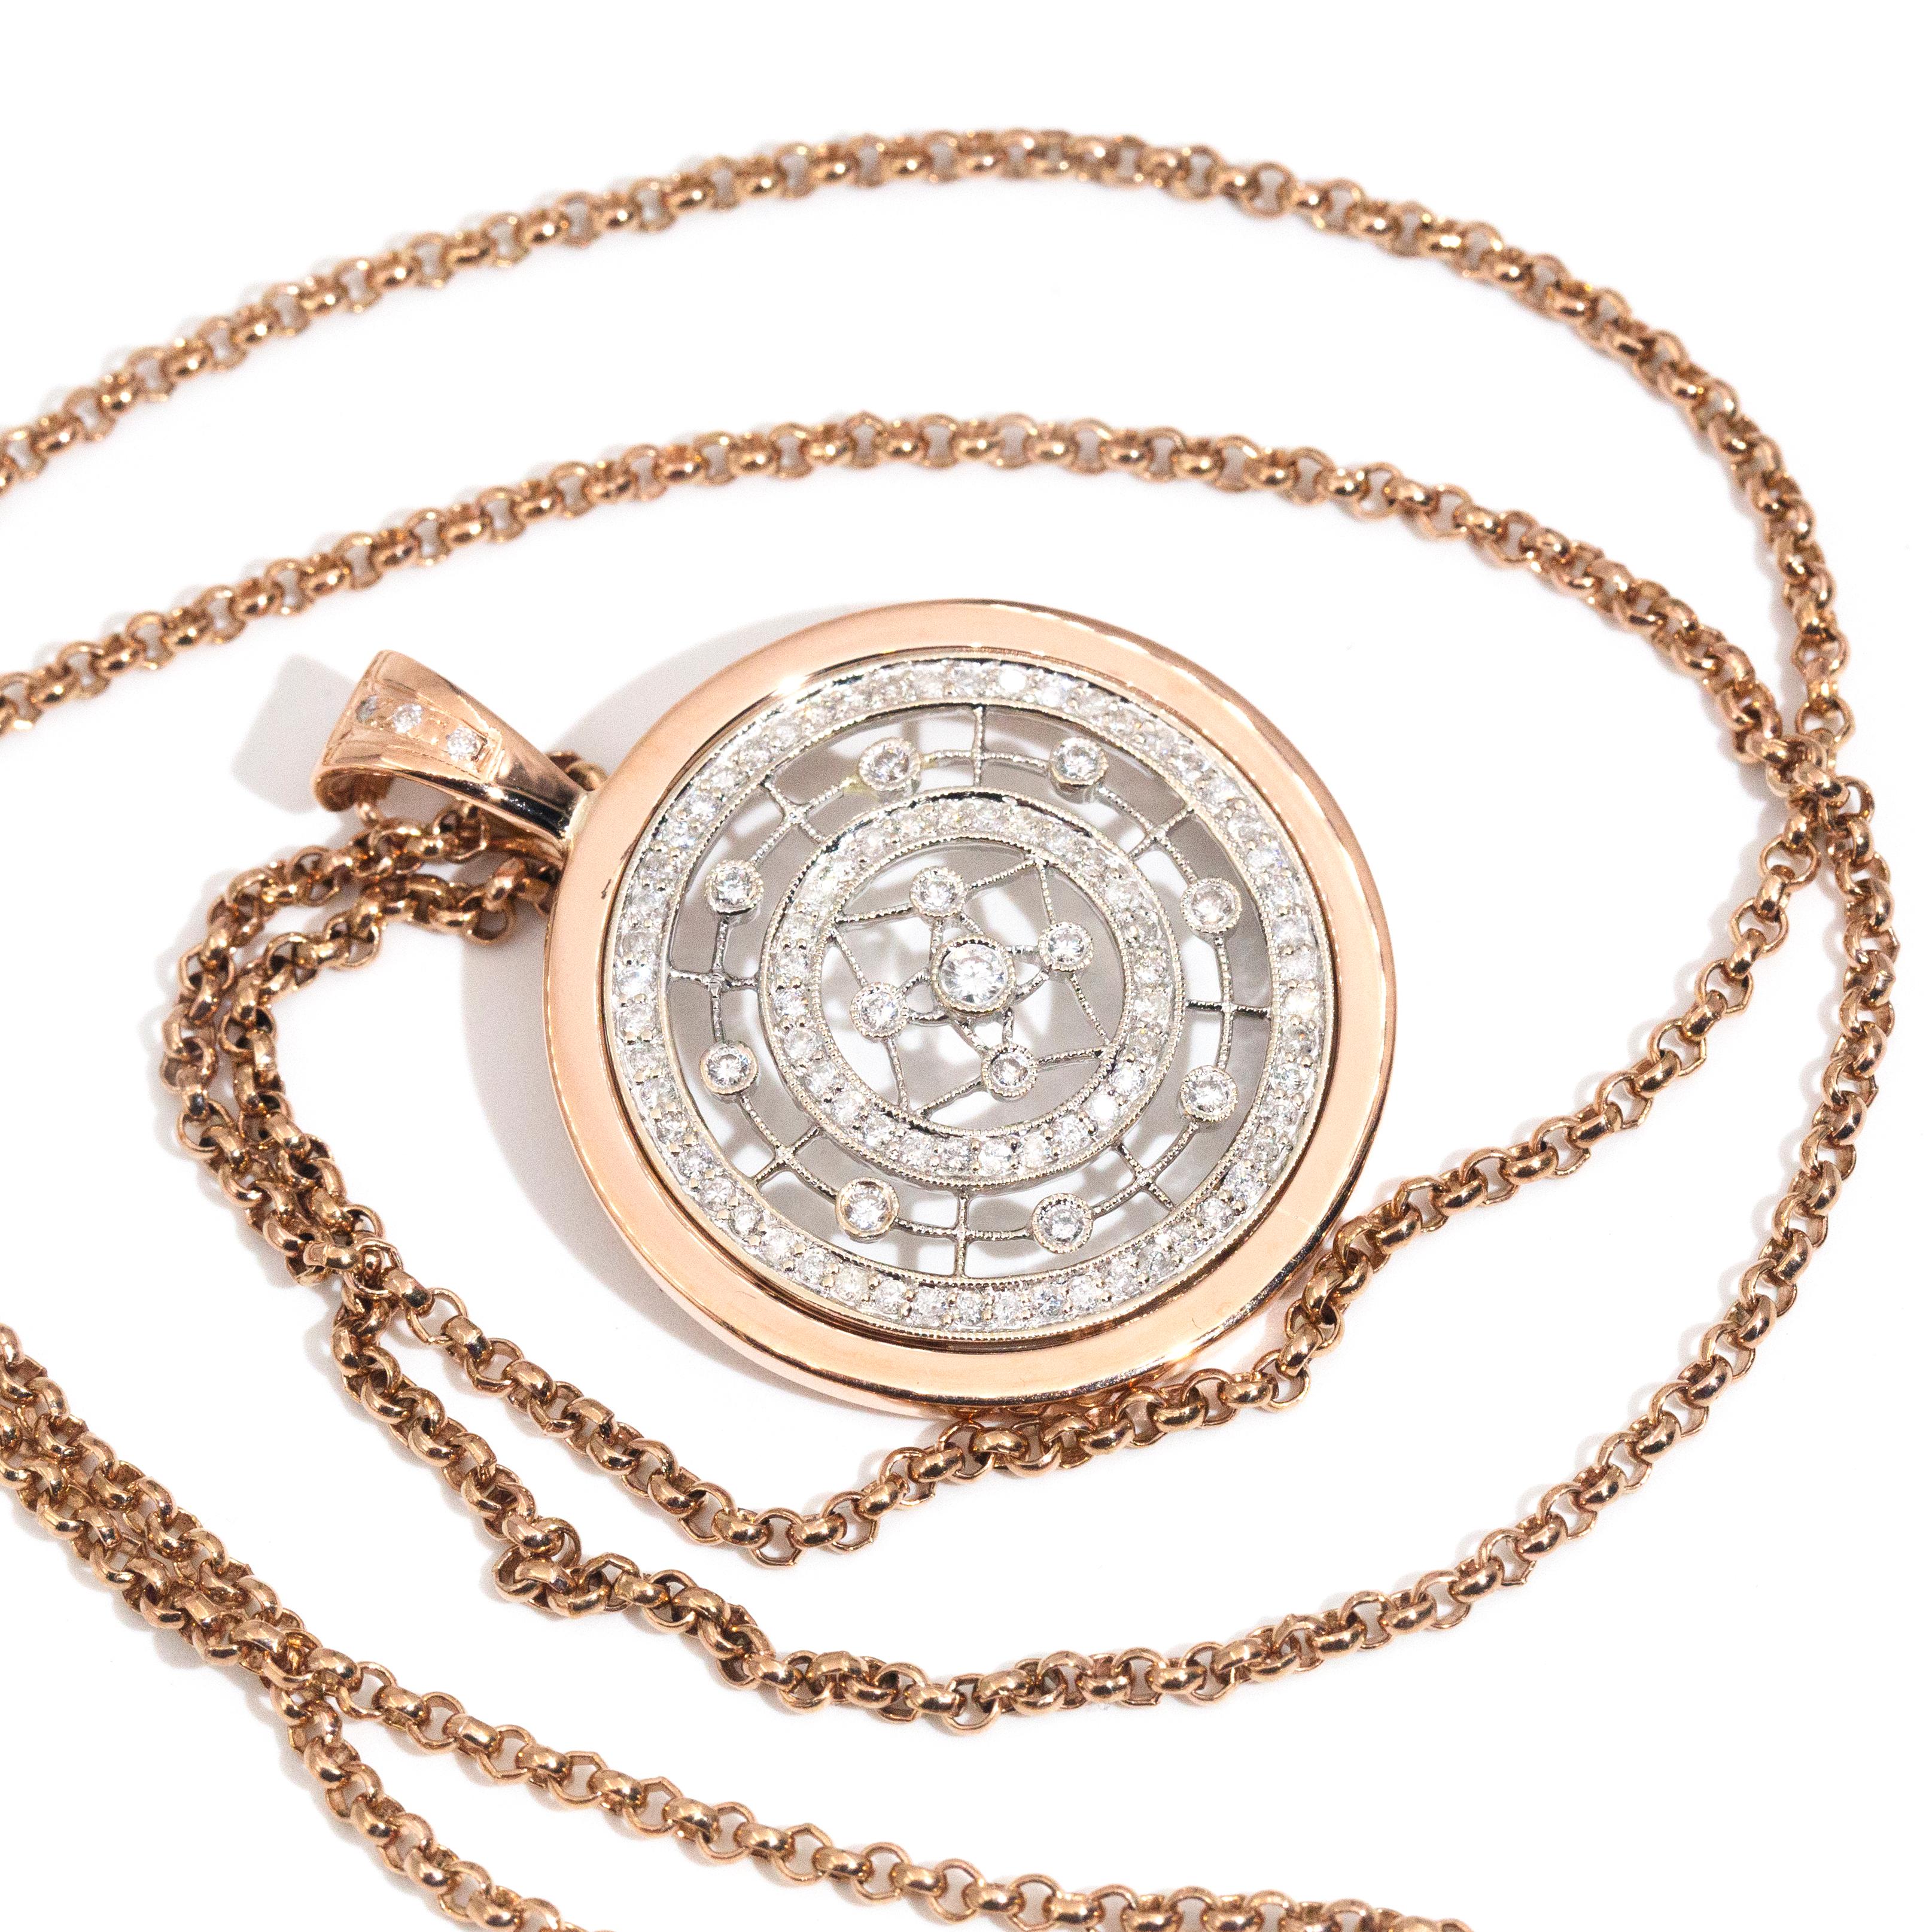 Crafted in 9 carat rose and white gold, this wonderful enhancer pendant features an elegant rose gold circular frame. The frame holds a white gold filigree gallery with two concentric halos of shimmering round brilliant diamonds and additional round